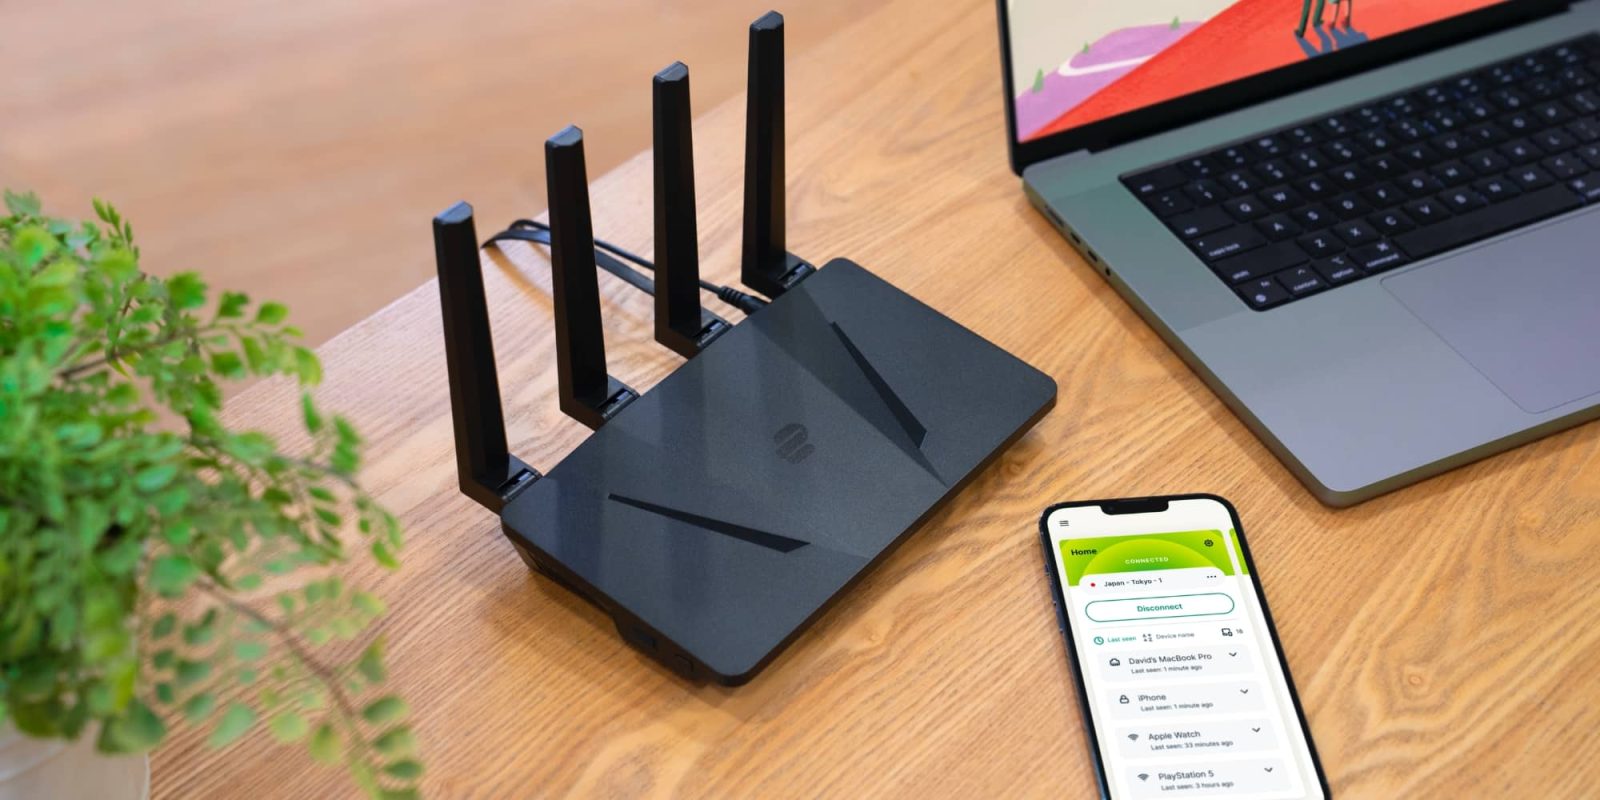 Apple @ Work: Aircove router with ExpressVPN integration makes me long for a world where Apple still makes home routers